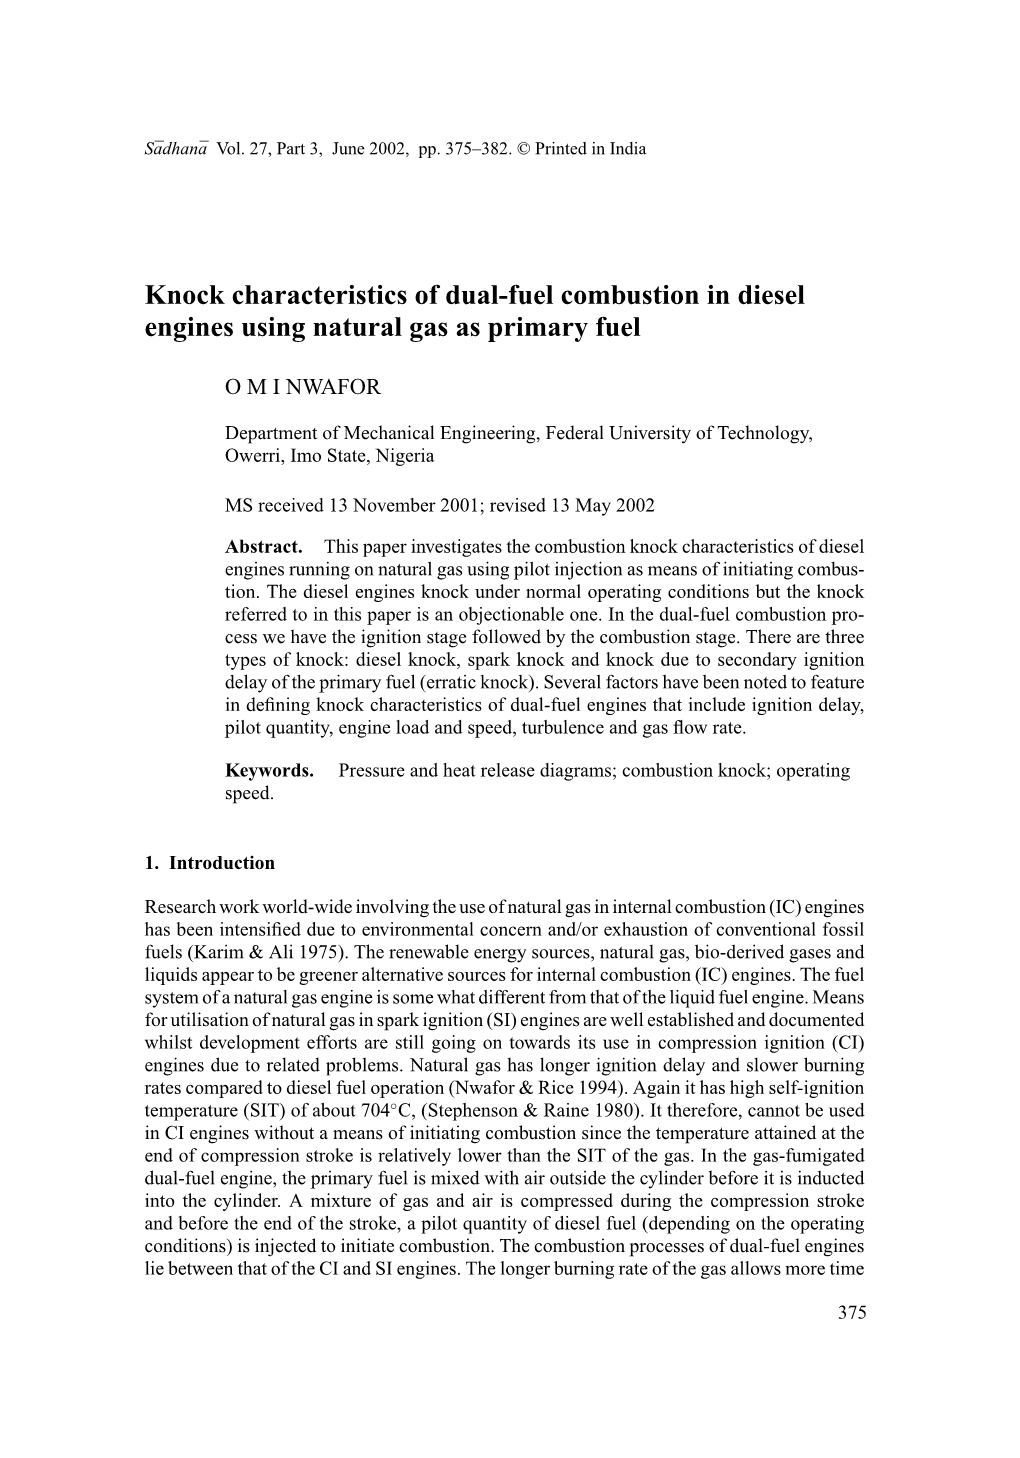 Knock Characteristics of Dual-Fuel Combustion in Diesel Engines Using Natural Gas As Primary Fuel